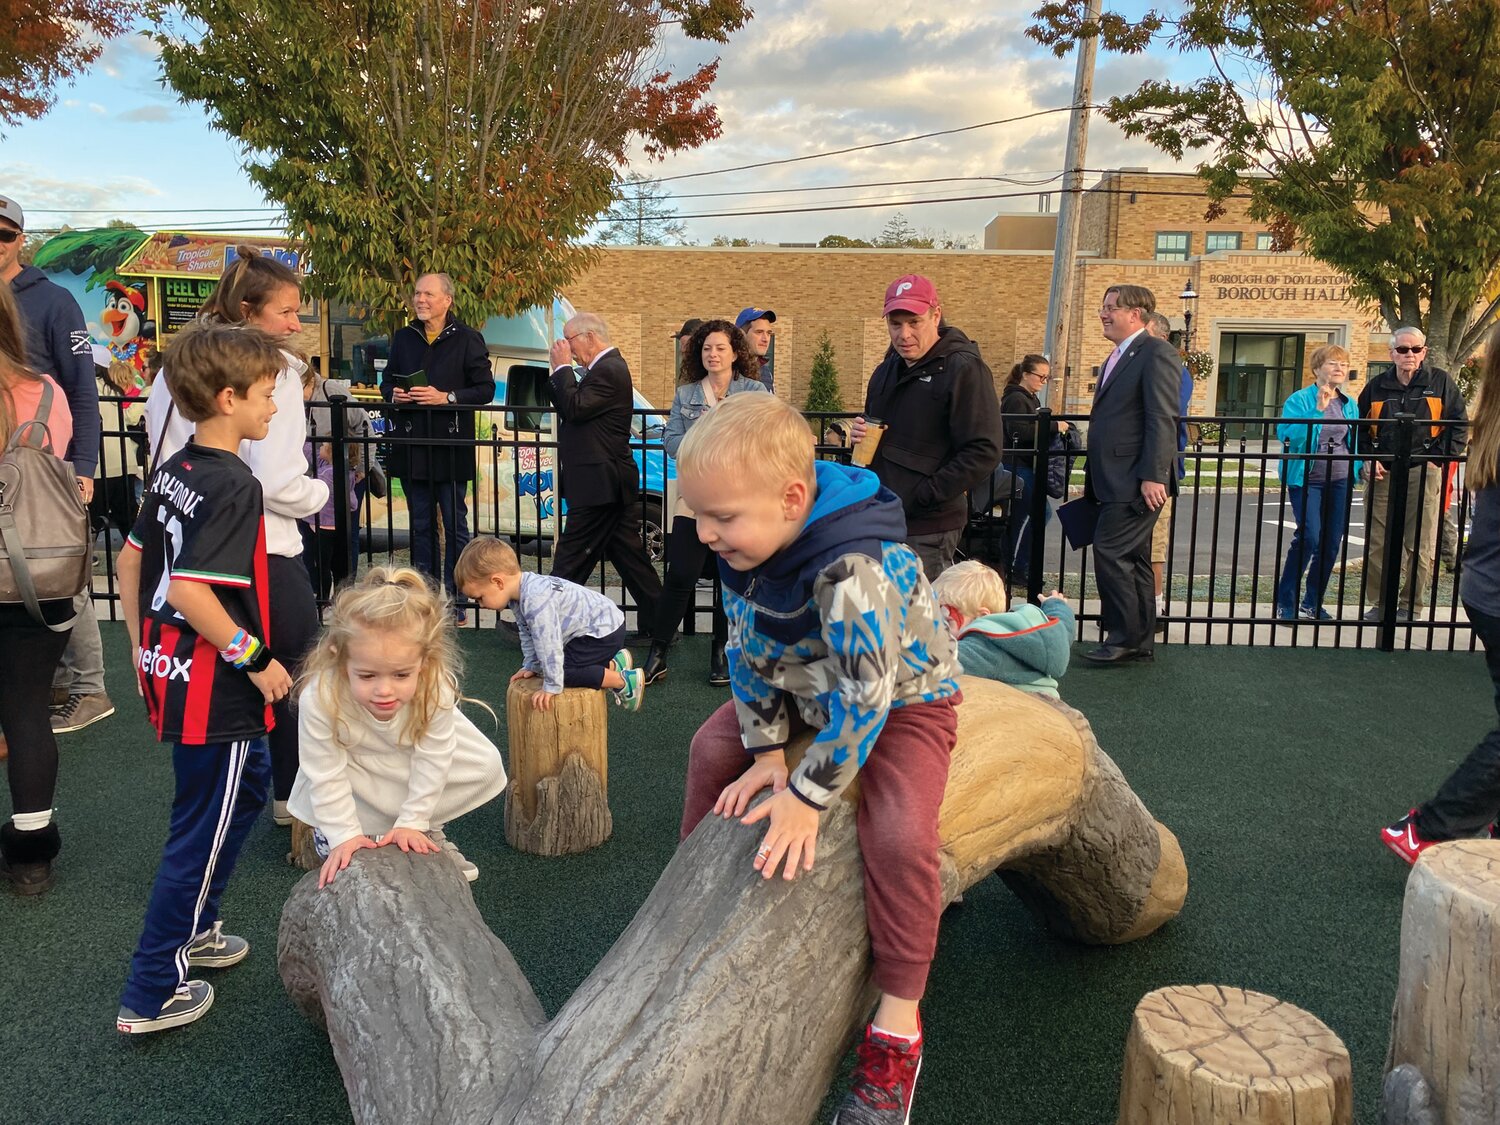 As parents watch from the fence, children climb toward a slide that resembles a huge tree trunk, with faux logs serving as steps.